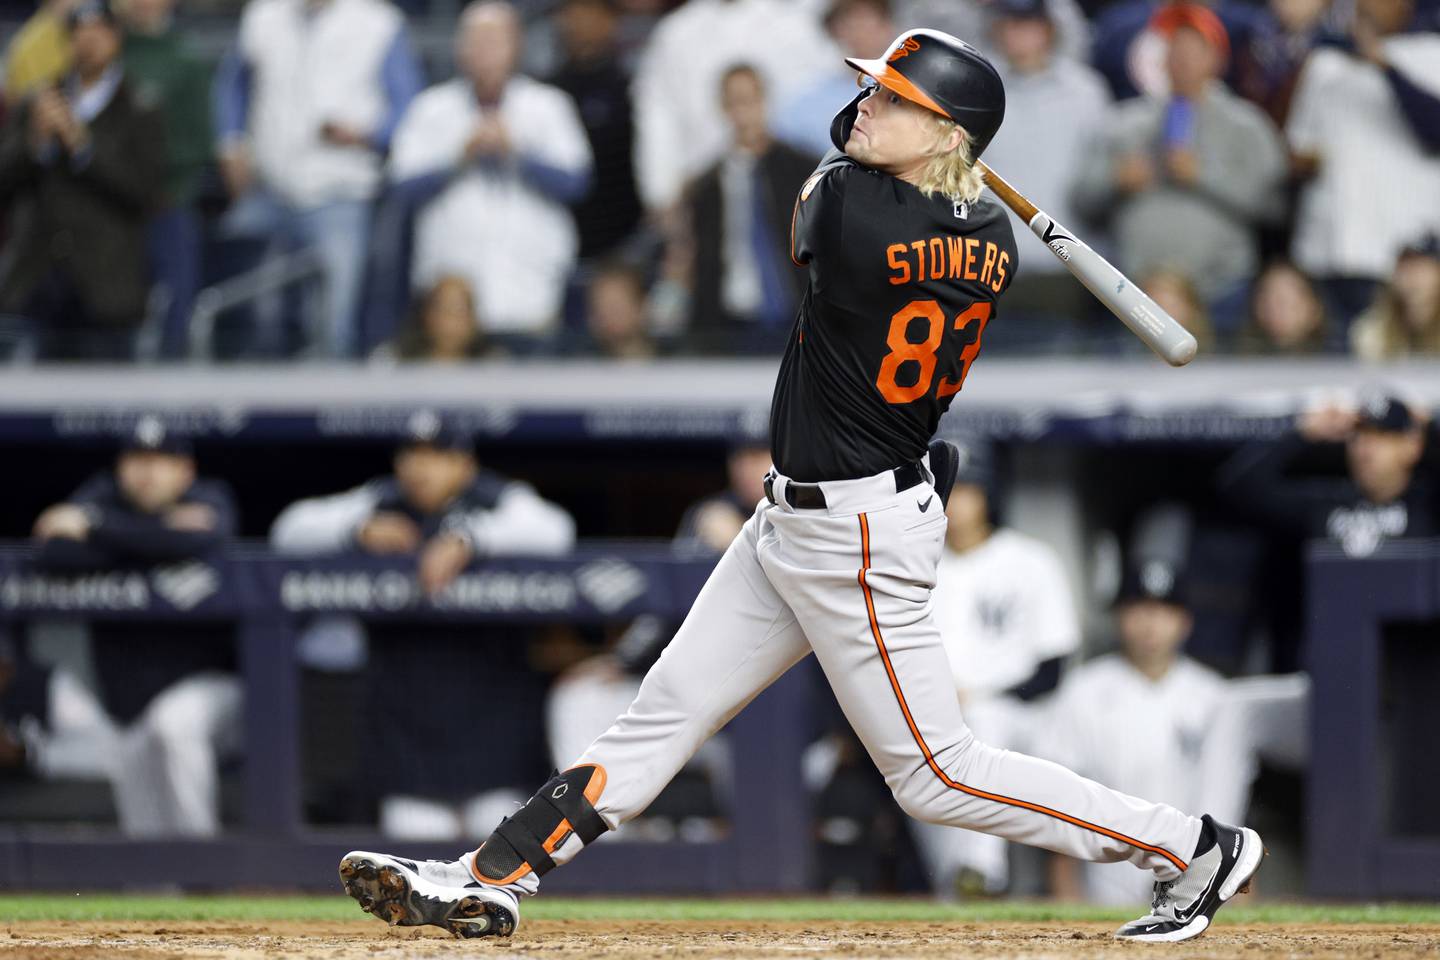 Kyle Stowers of the Baltimore Orioles at bat during the sixth inning against the New York Yankees at Yankee Stadium on September 30, 2022 in the Bronx borough of New York City.